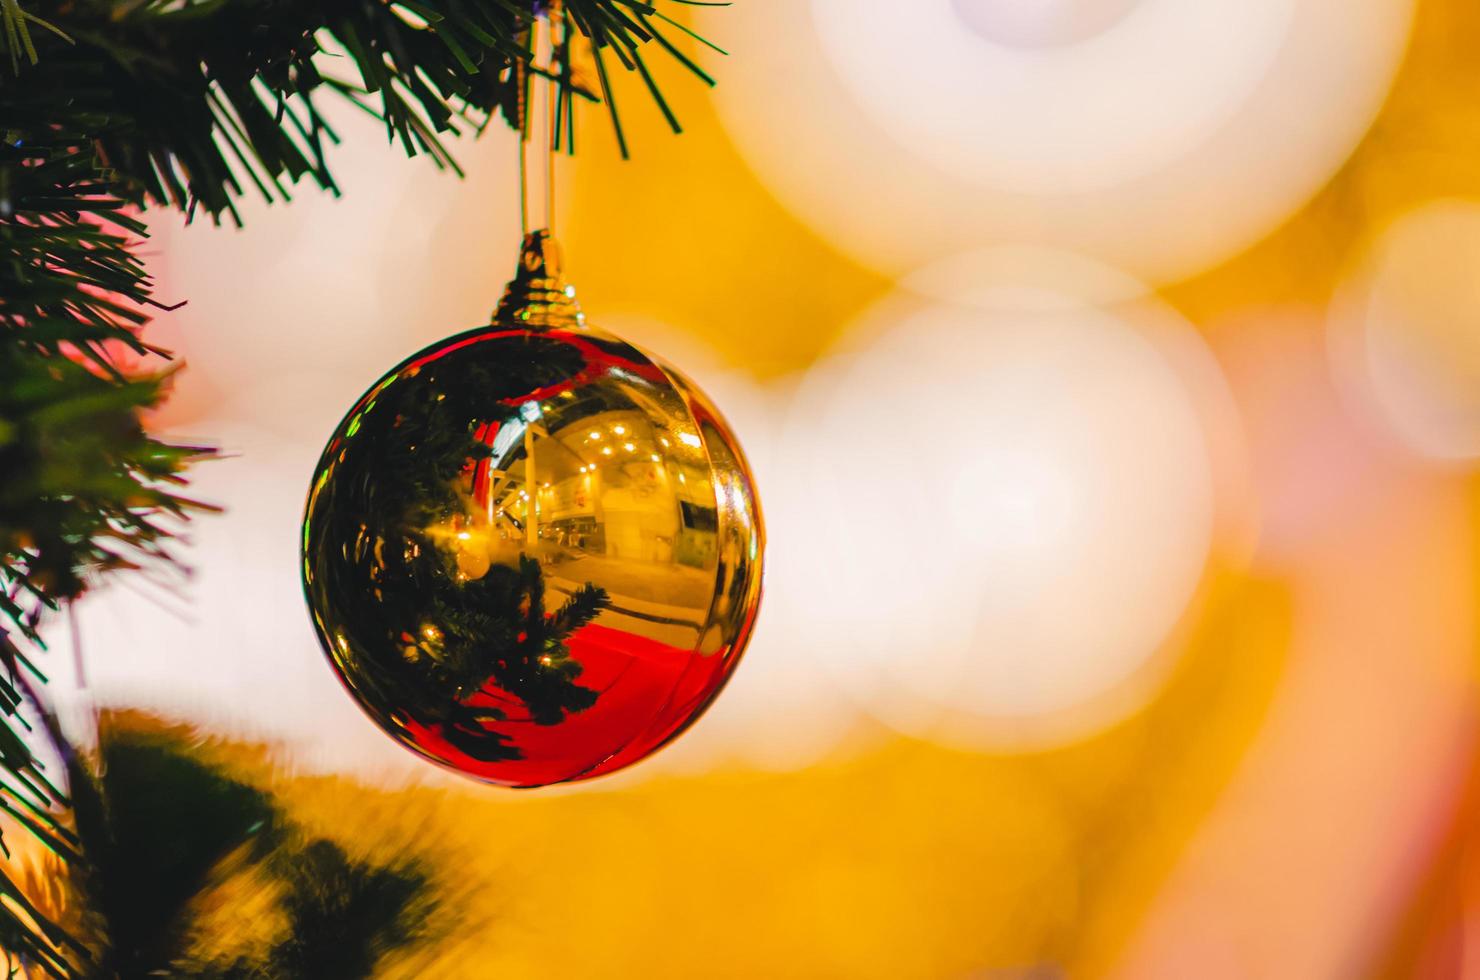 Partial focus of golden bauble hanging on Christmas tree with colorful background. photo